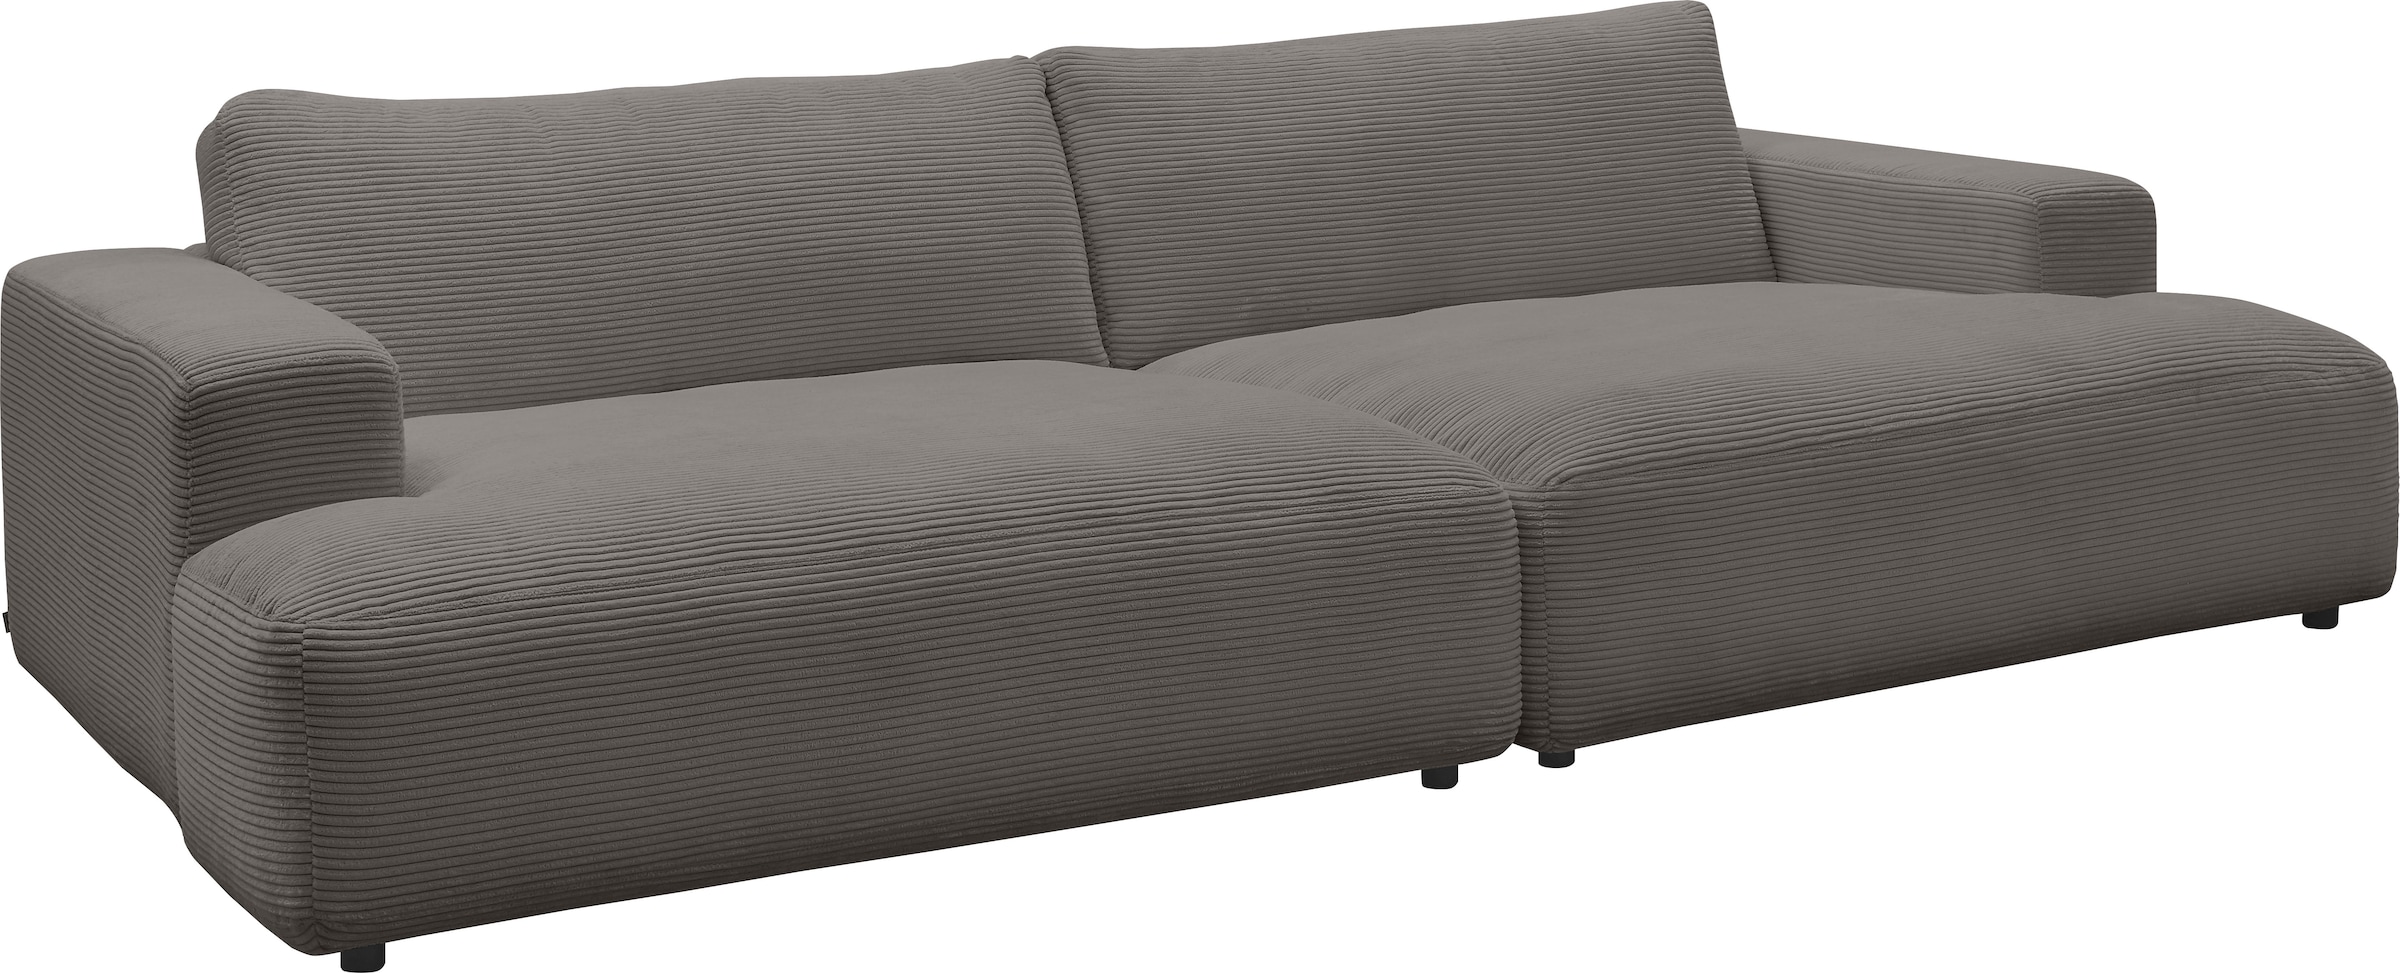 OTTO Online Cord-Bezug, cm M Breite branded Musterring by 292 GALLERY Loungesofa Shop »Lucia«,